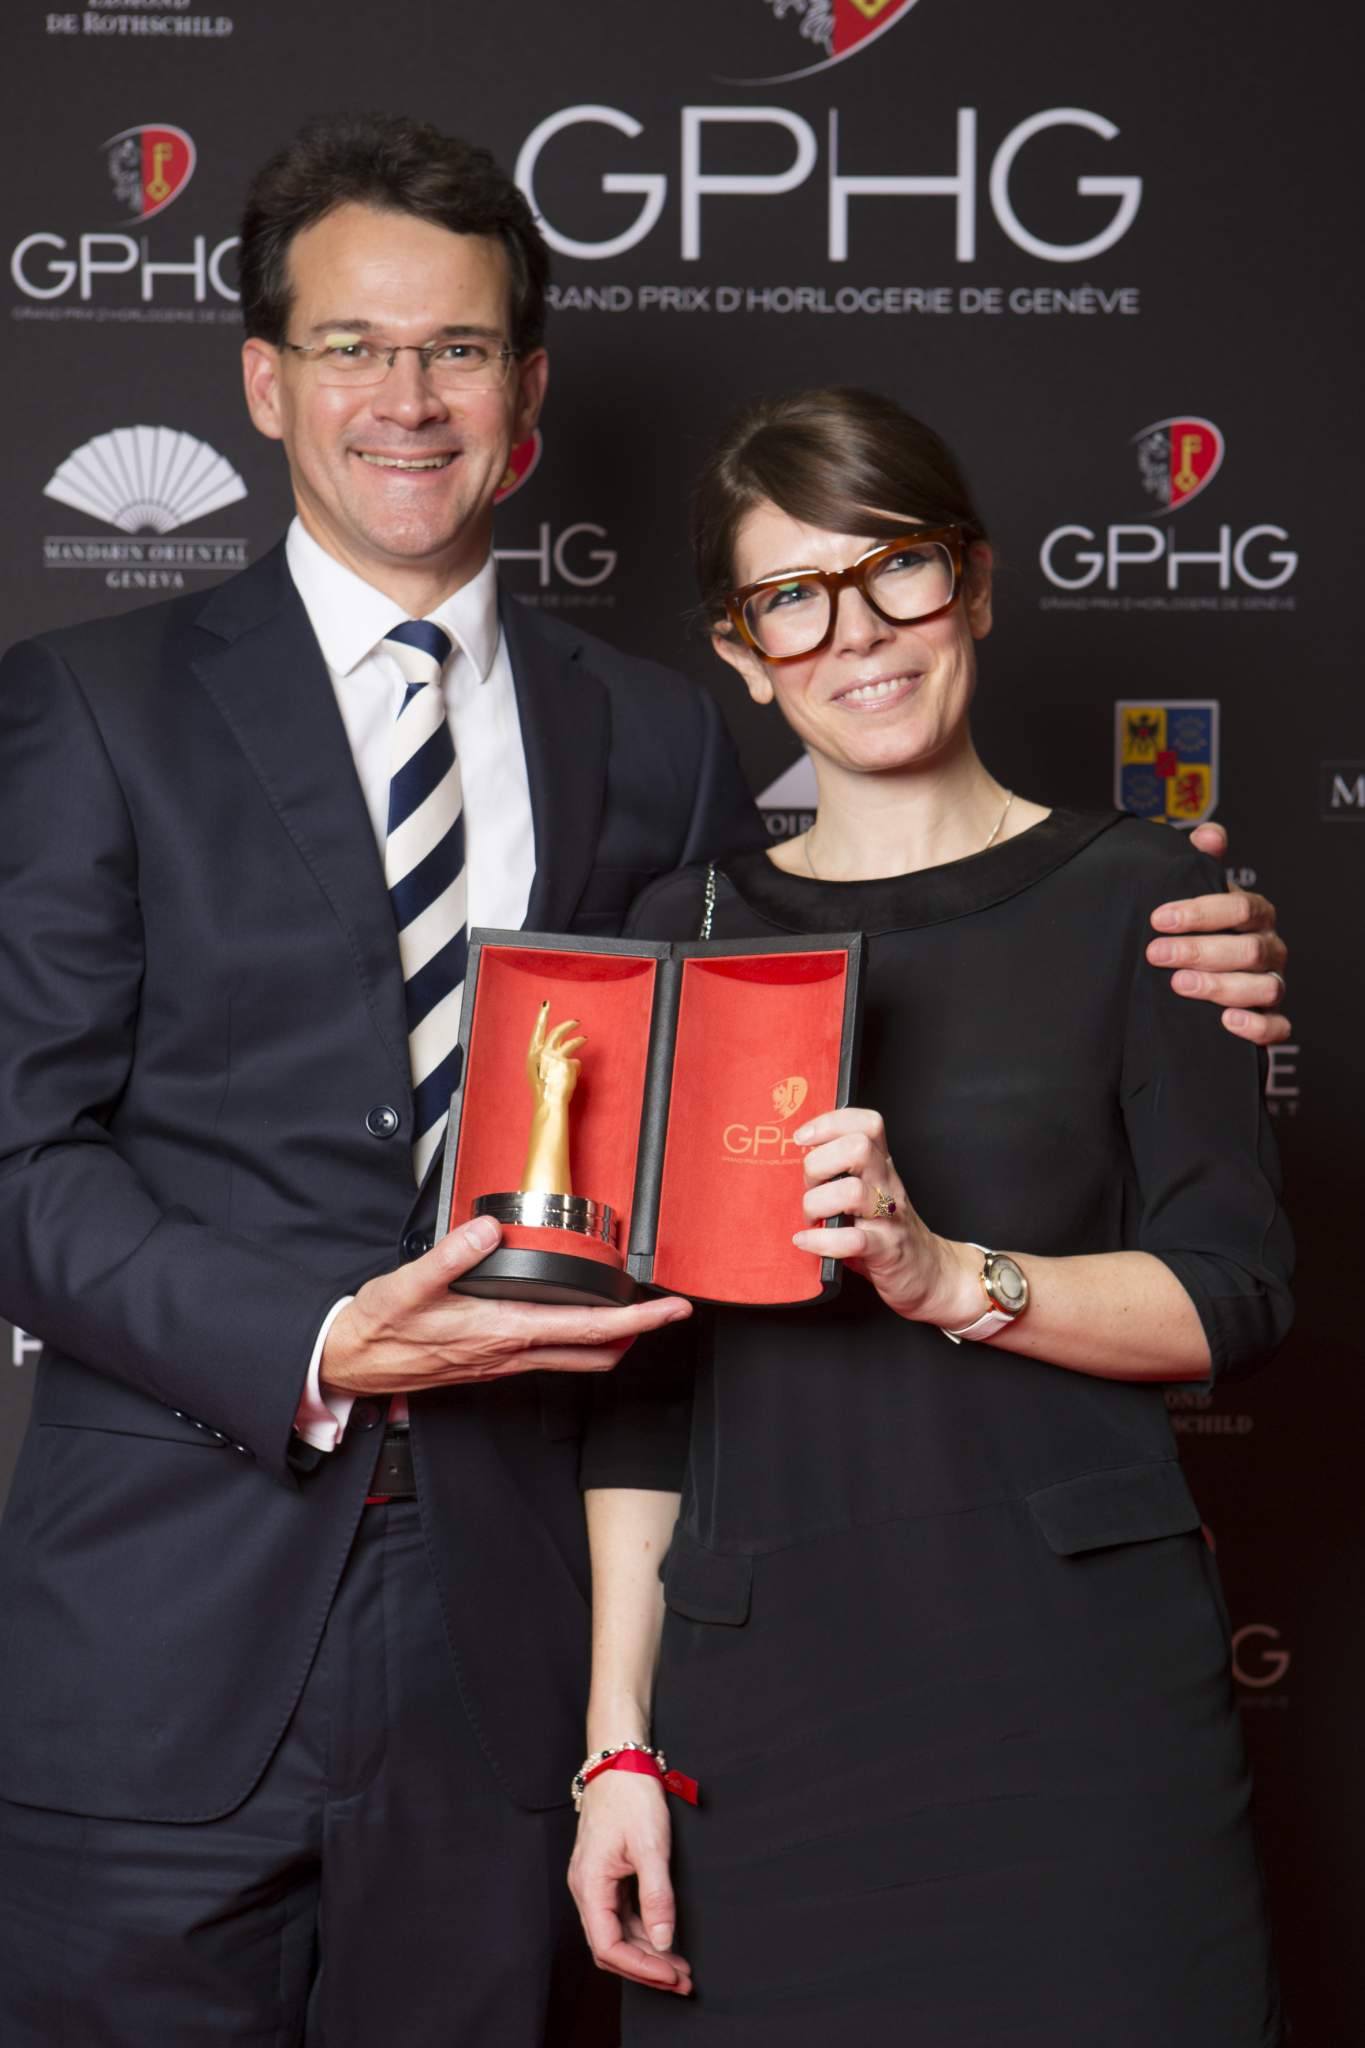 Sean Gilbertson and Aurélie Picaud (CEO and Timepieces Director of Fabergé, winner of the Travel Time Watch Prize 2016)